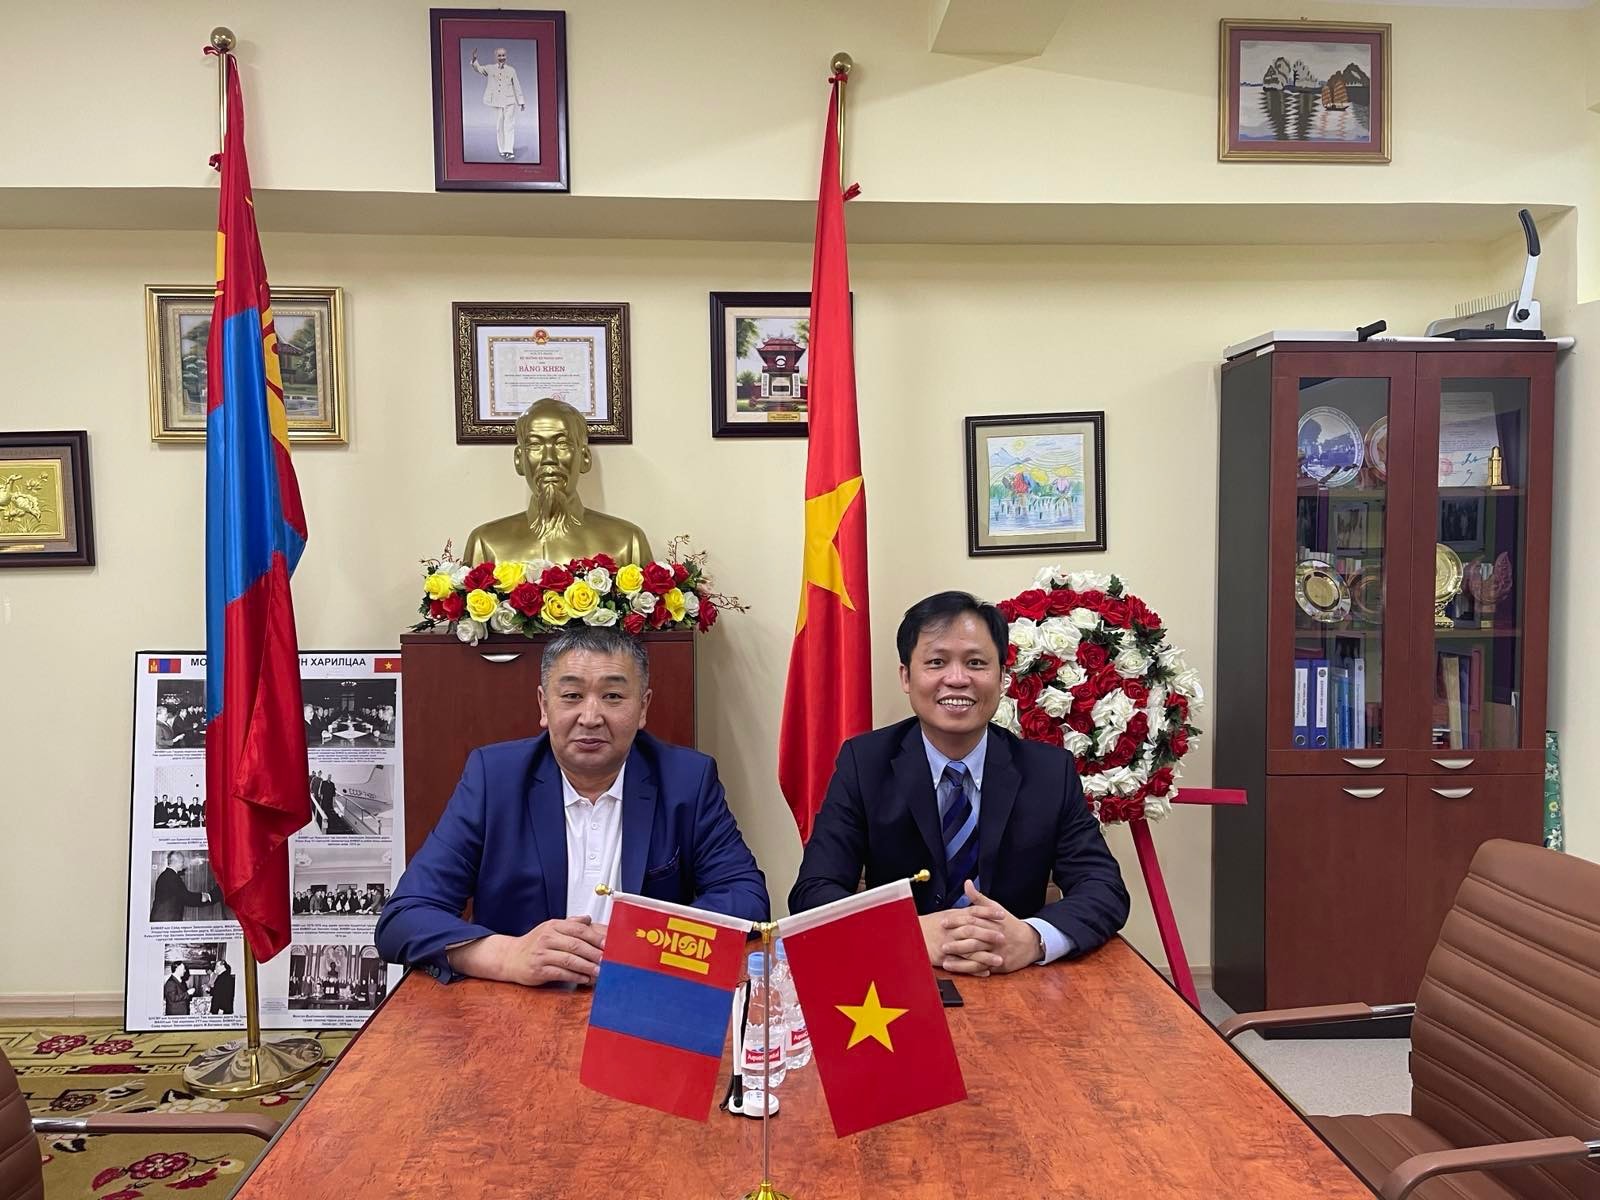 A story of special school named after Uncle Ho in the heart of Mongolian capital: Ambassador